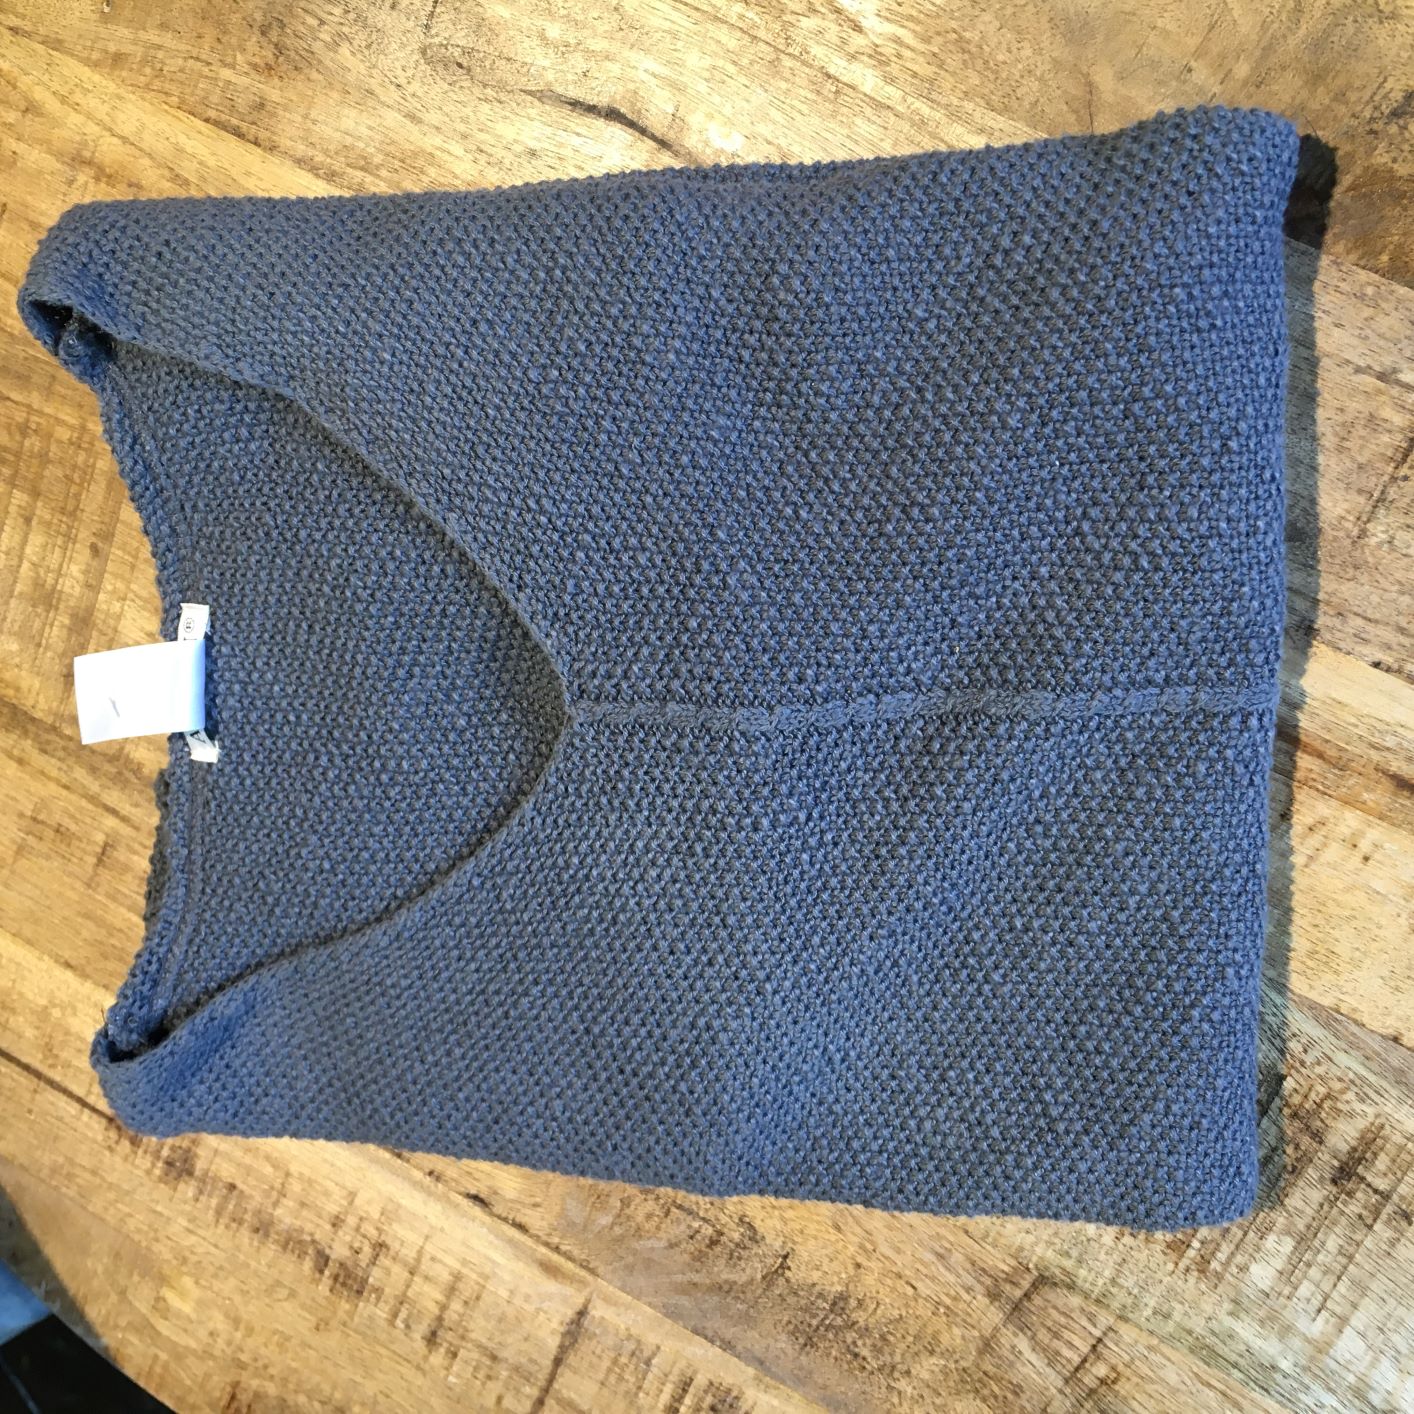 100% cotton slub seed stitch sweater by Avalin. In color Charcoal with long sleeves, v-neck, center seam, ribbed cuffs and ribbed straight hem with side slits. Falls just below mid hip.  Made in USA.